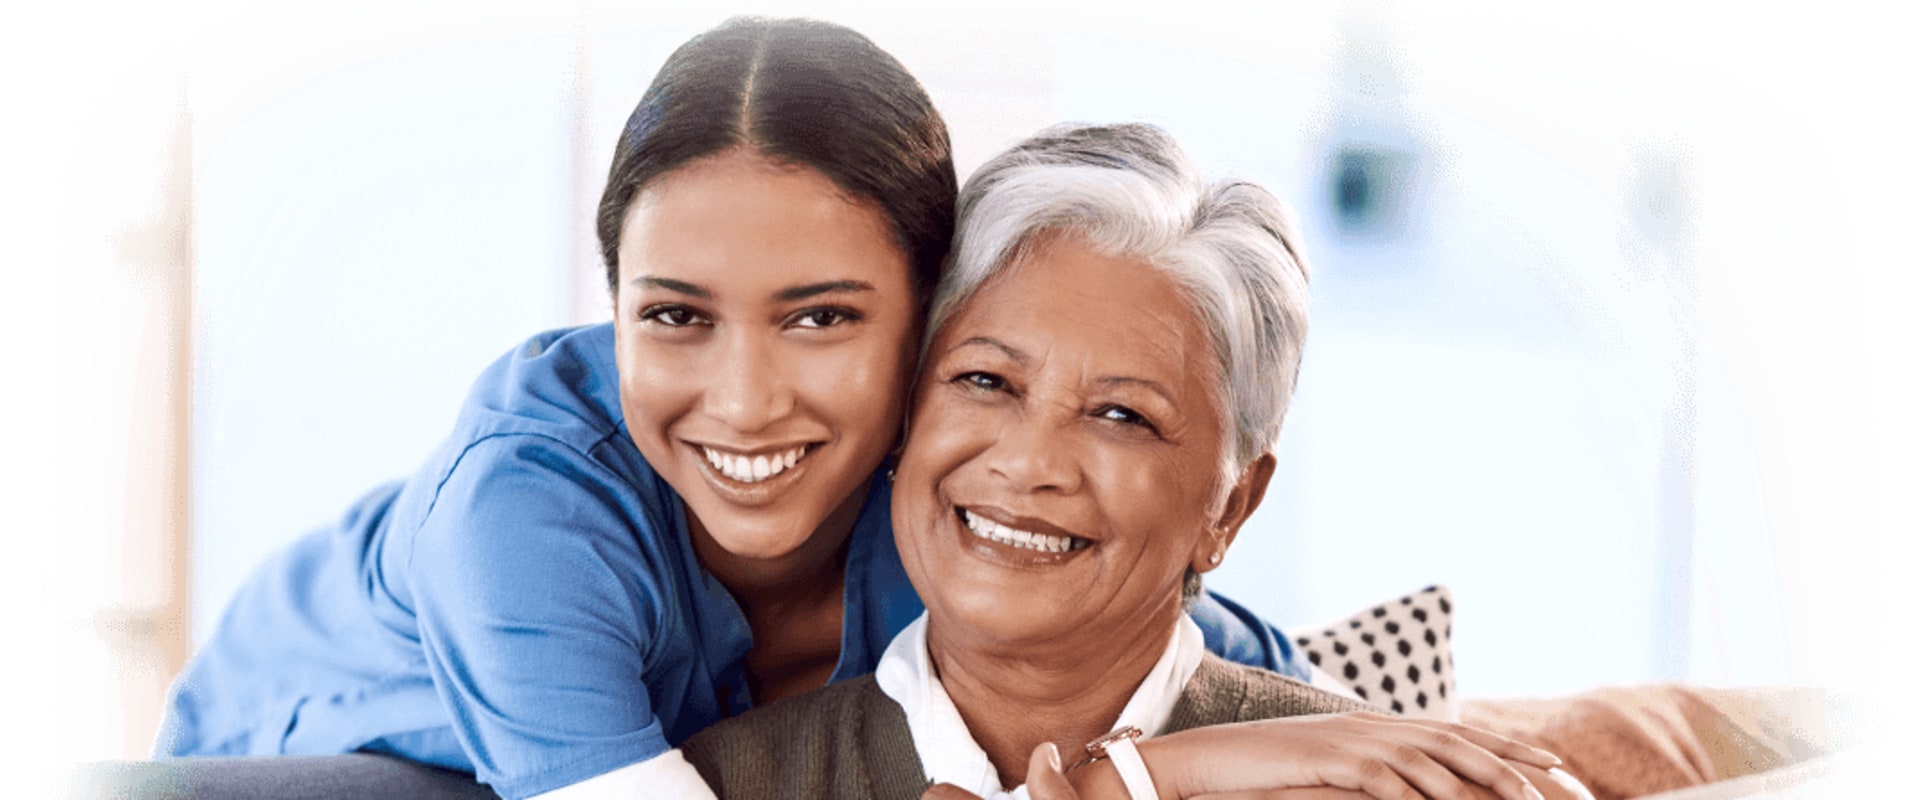 Home Modification Services for Caregivers in Orange County: Making Aging Safe and Comfortable